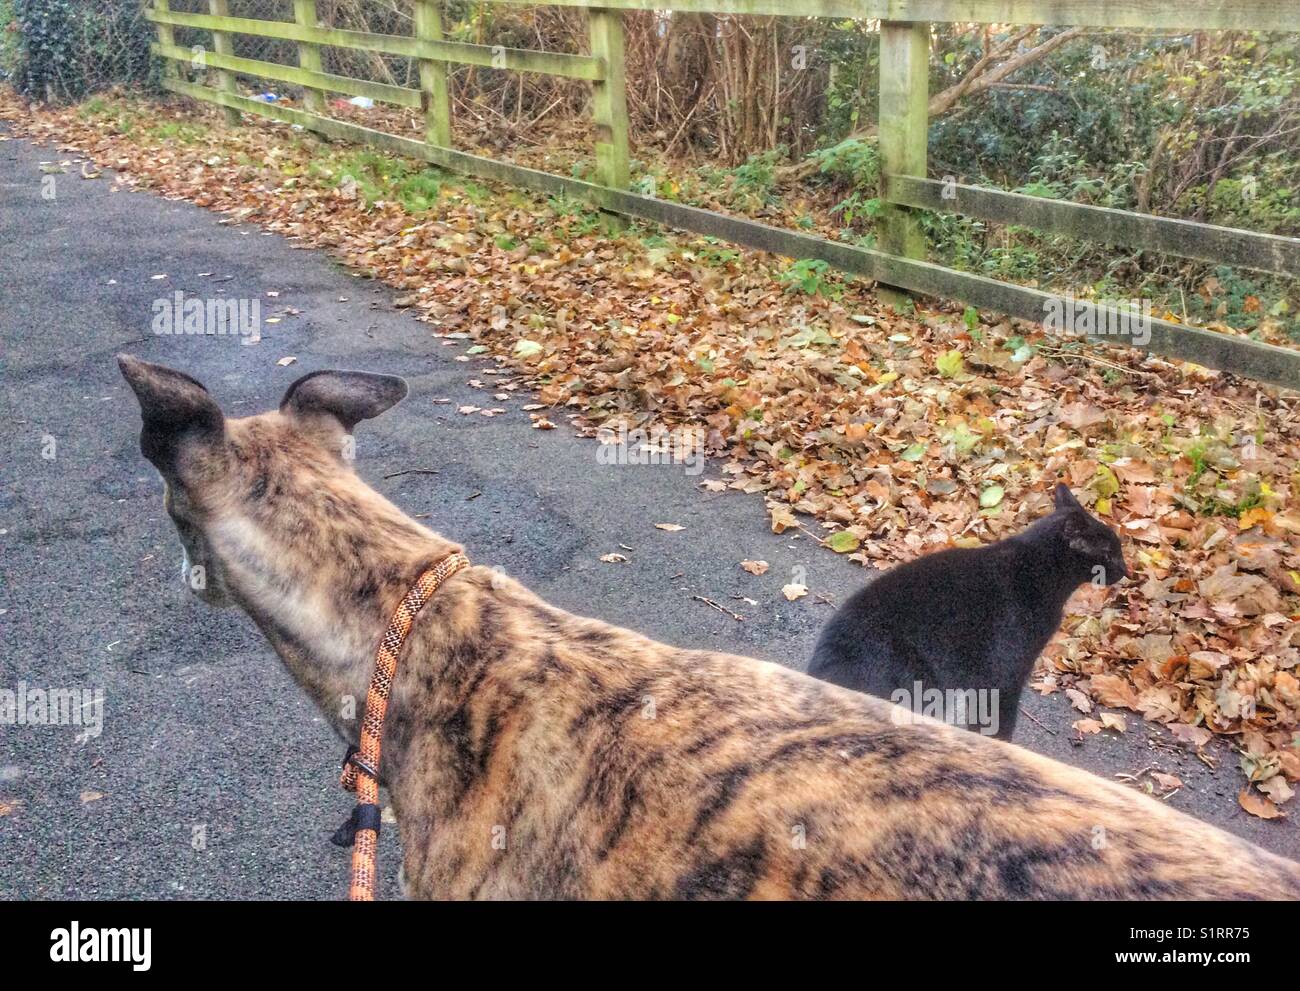 Black cat loves following a greyhound dog for a walk through a nature path during autumn at Llanelli, Carmarthenshire. Stock Photo